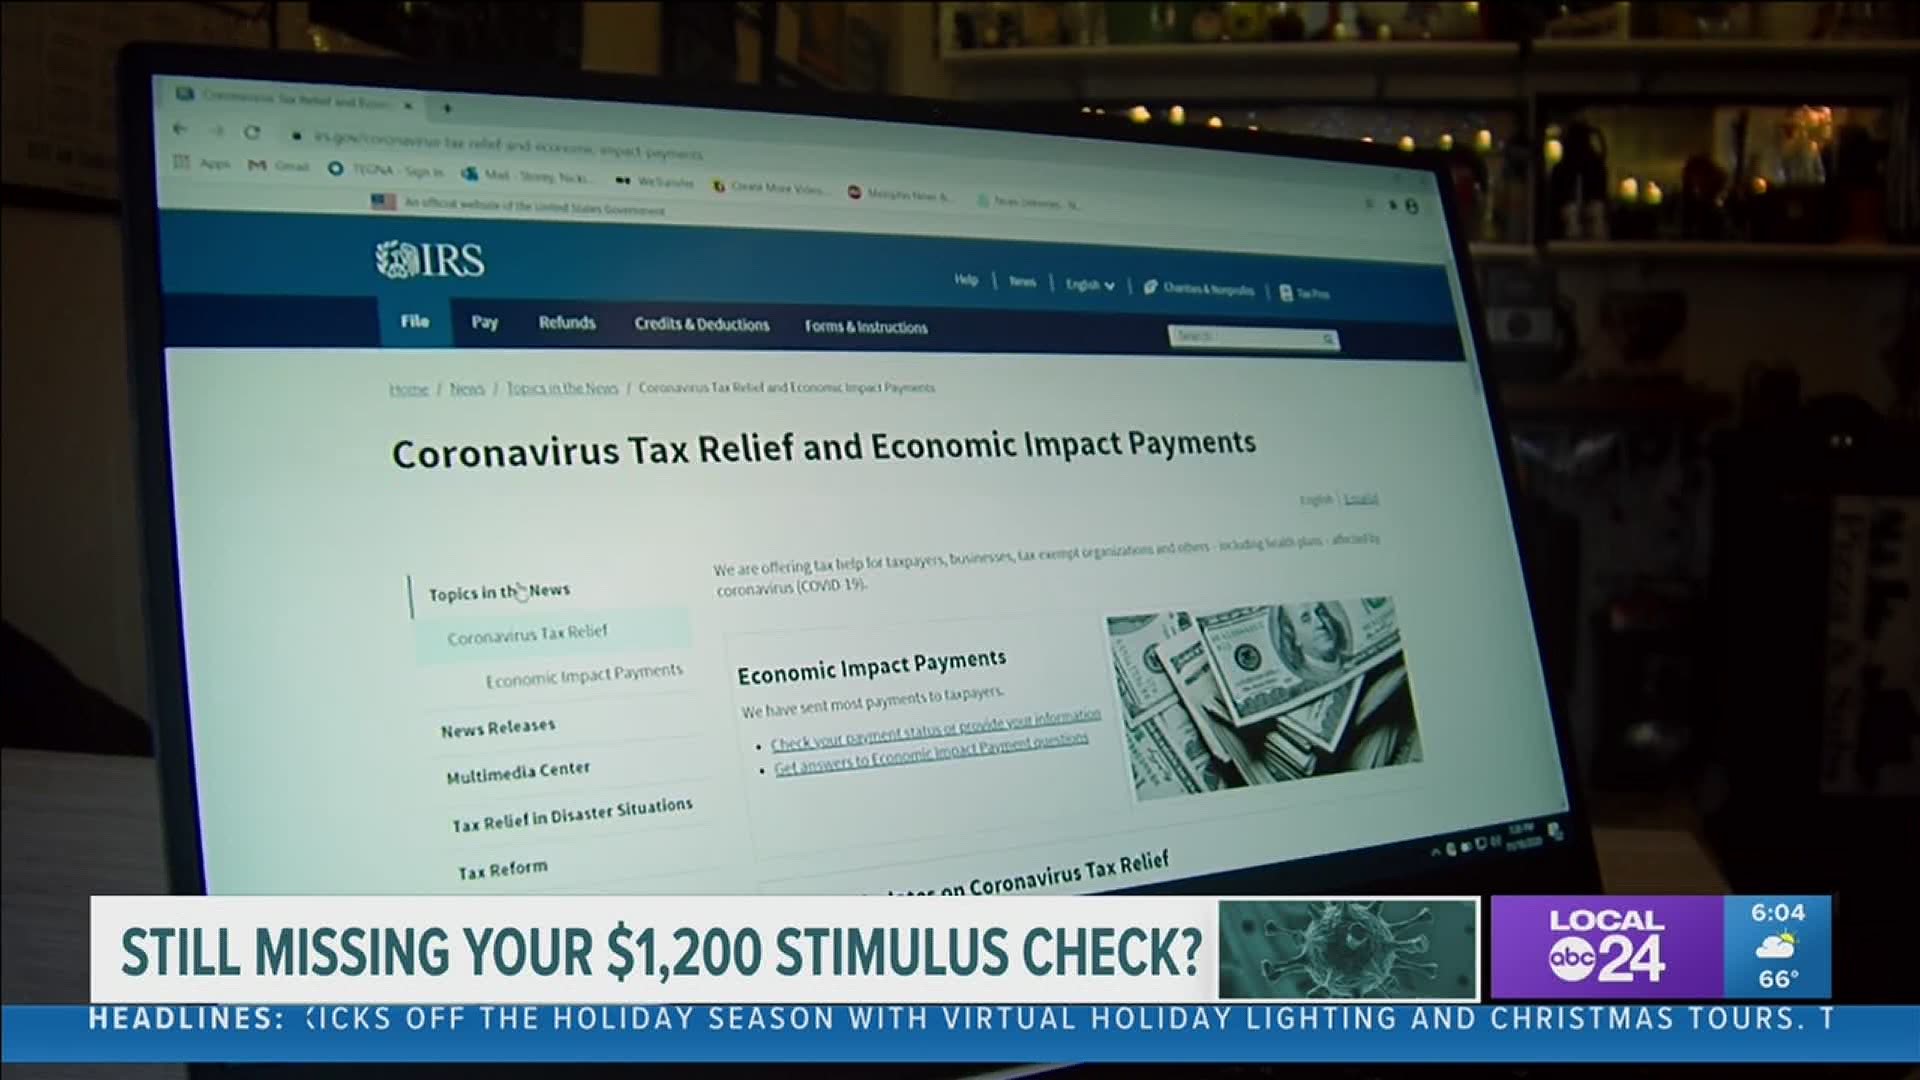 Deadline to file for $1,200 stimulus check is Saturday | 0